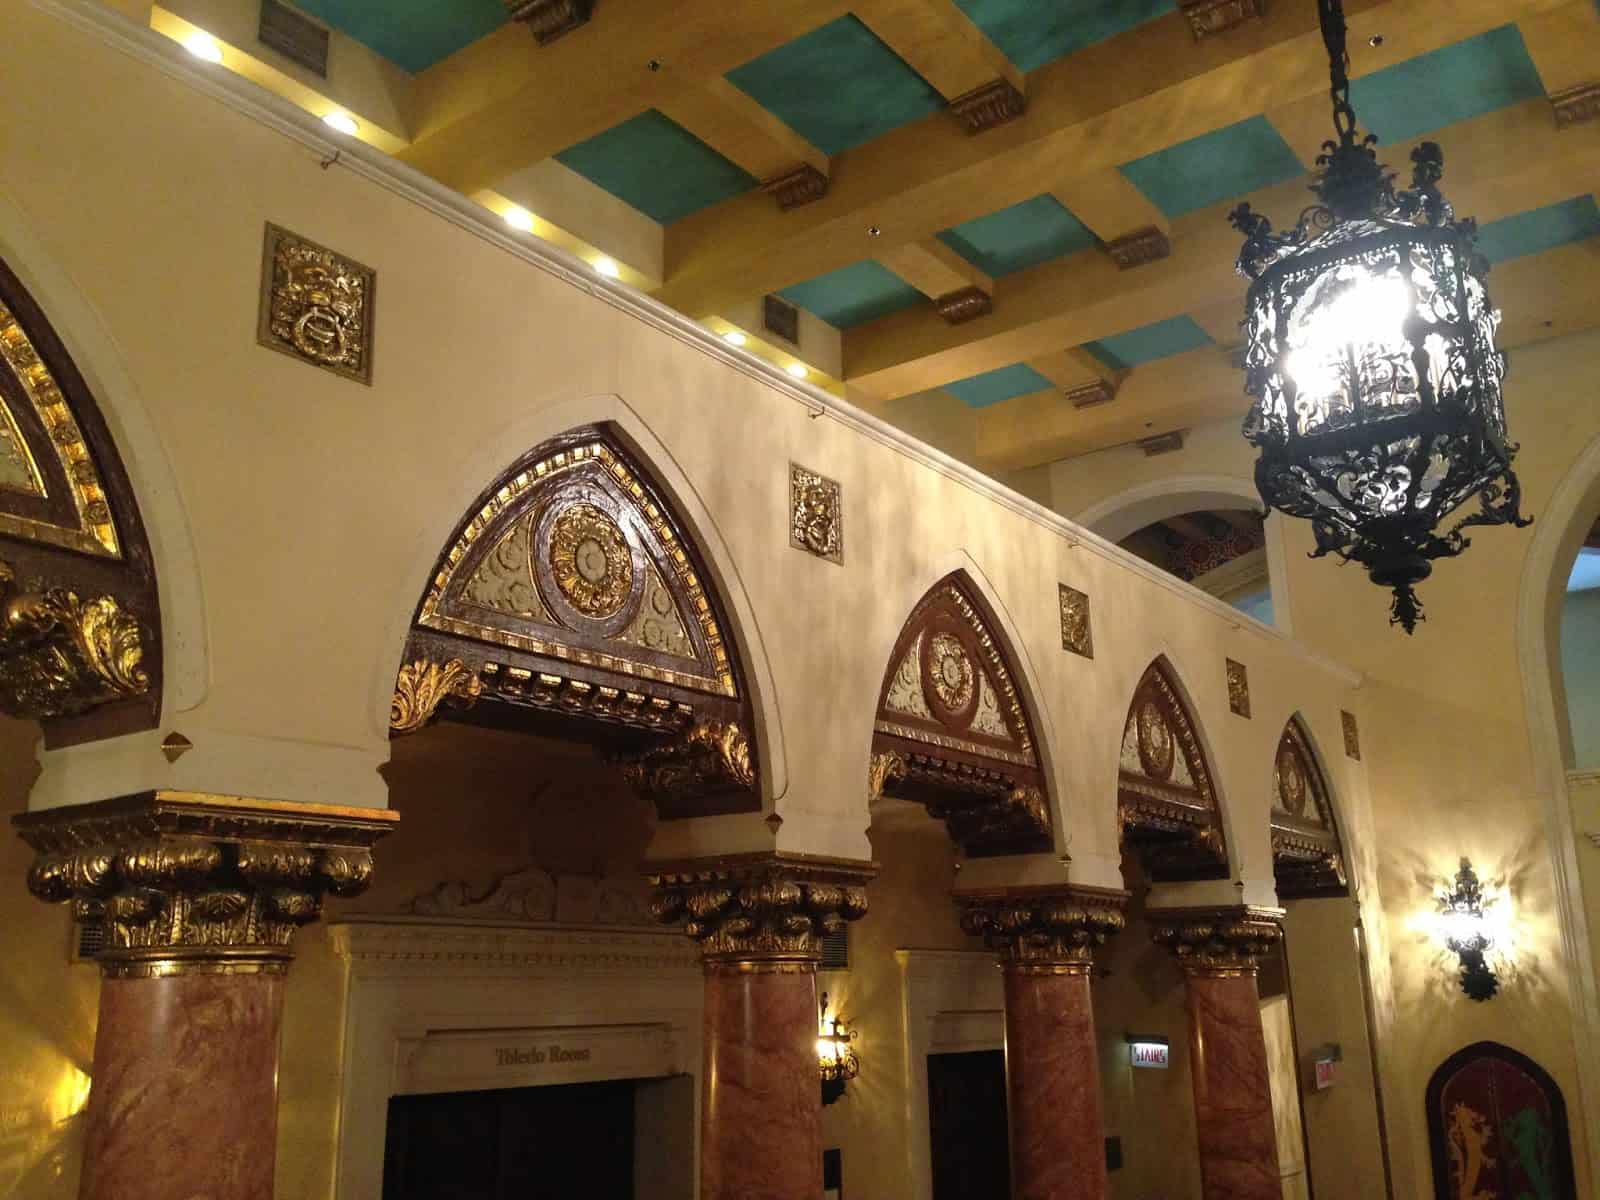 Spanish Court at the Hotel InterContinental in Chicago